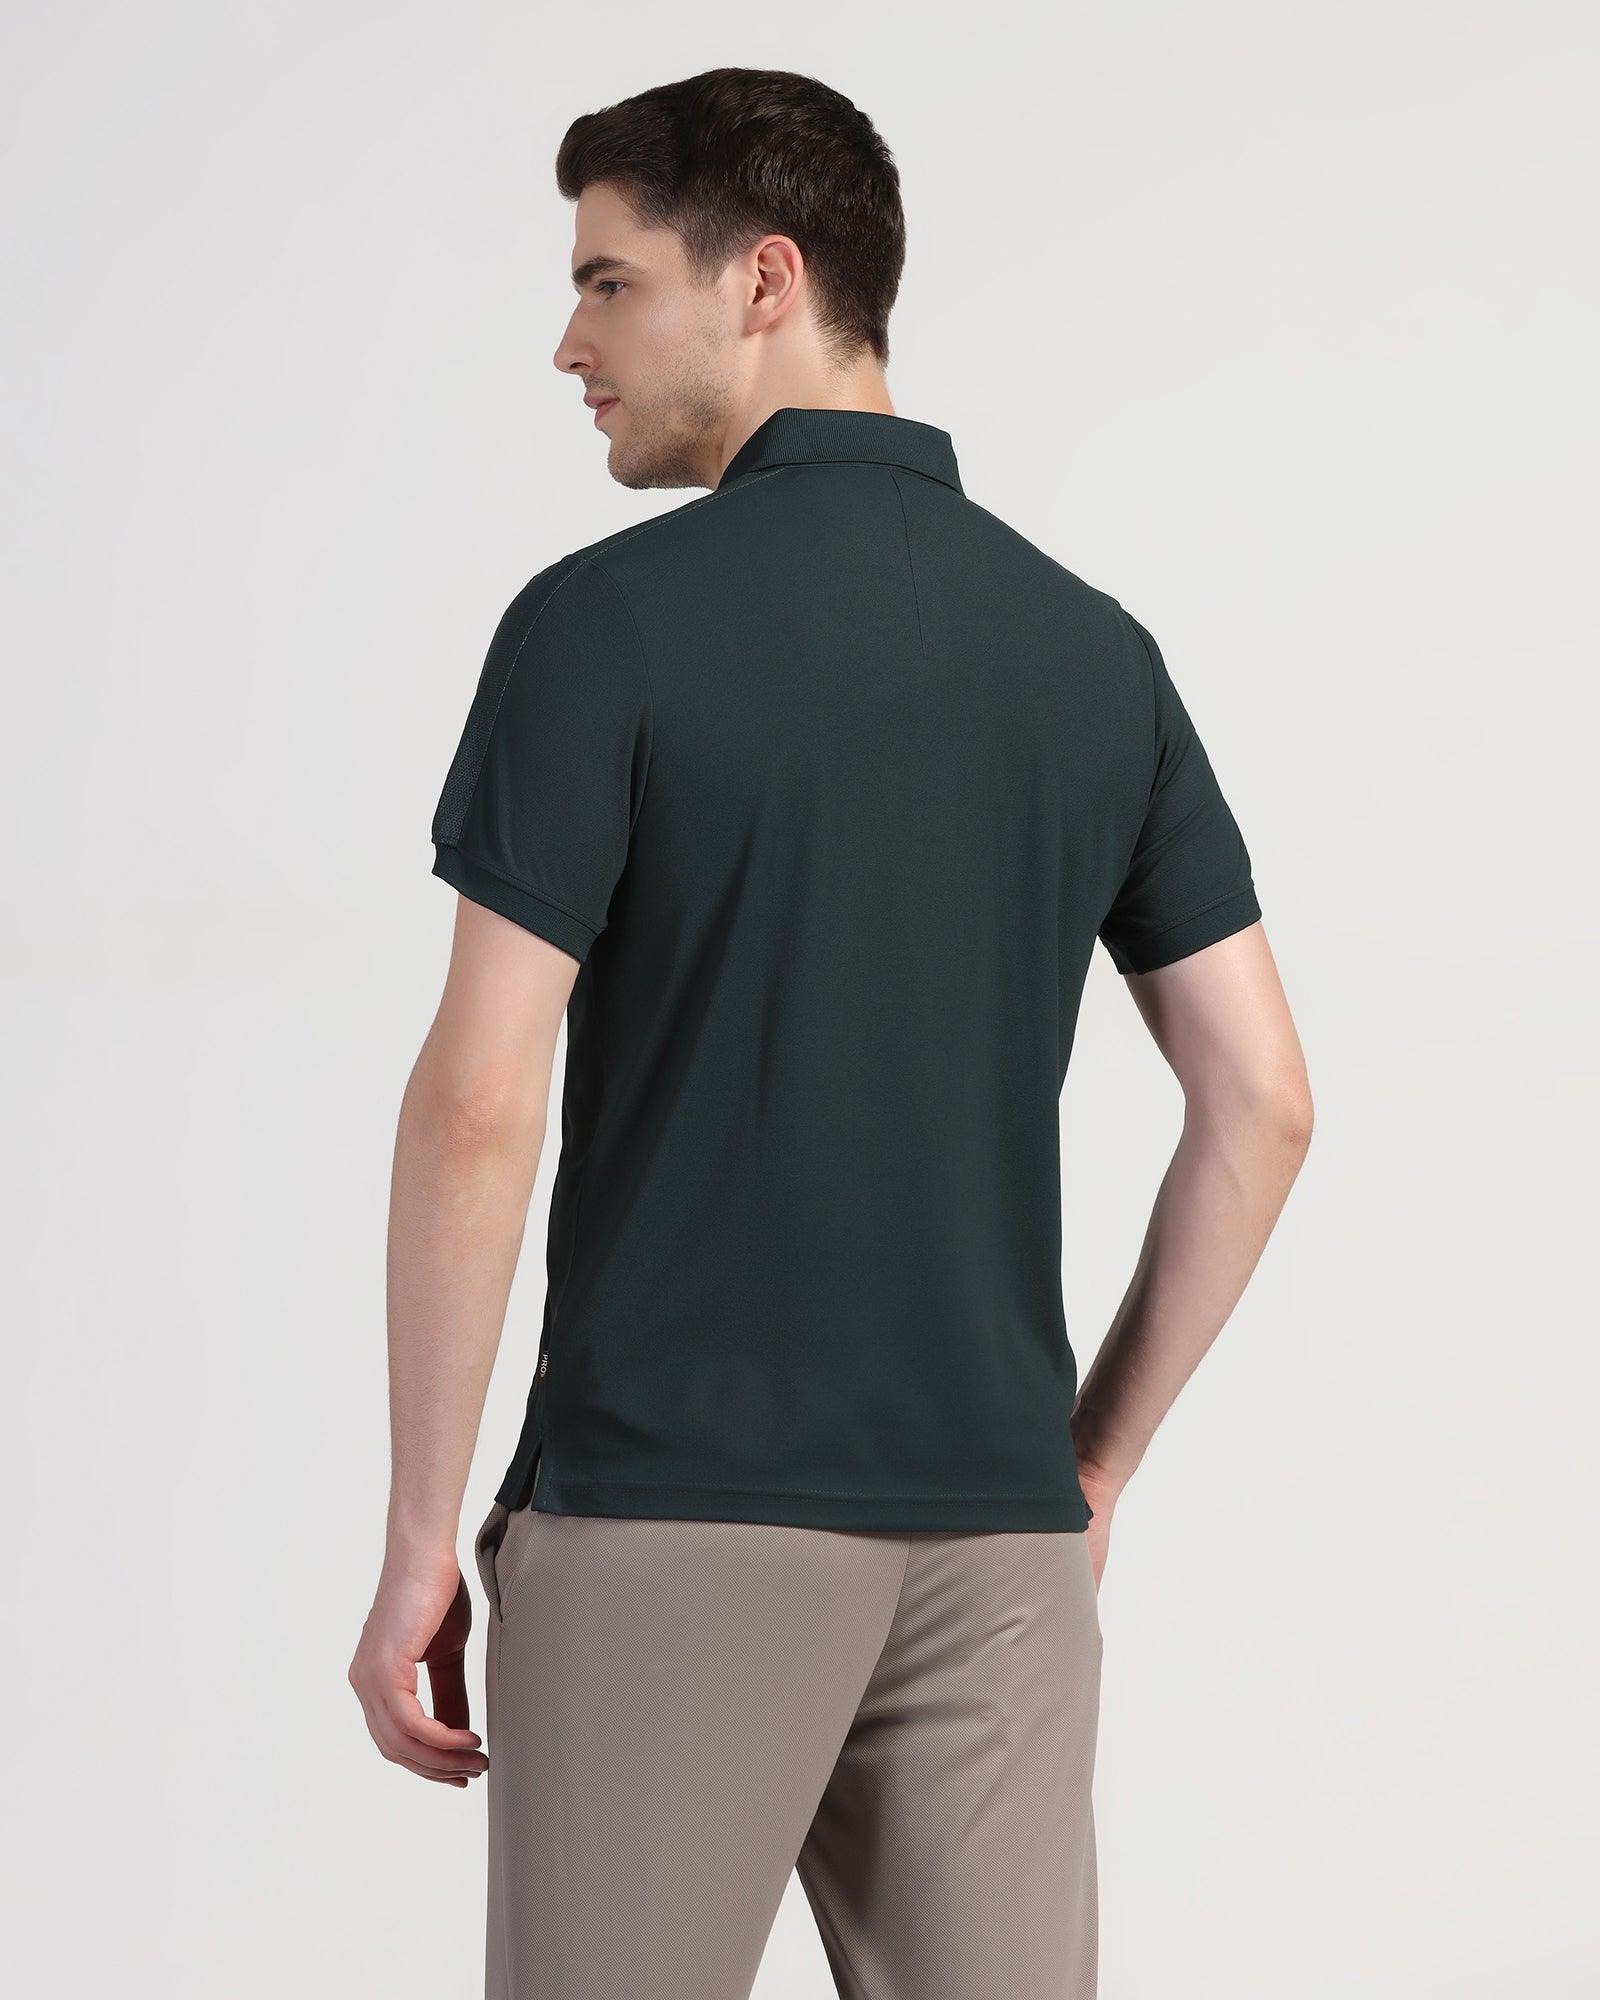 TechPro Polo Green Solid T-Shirt - Lewis